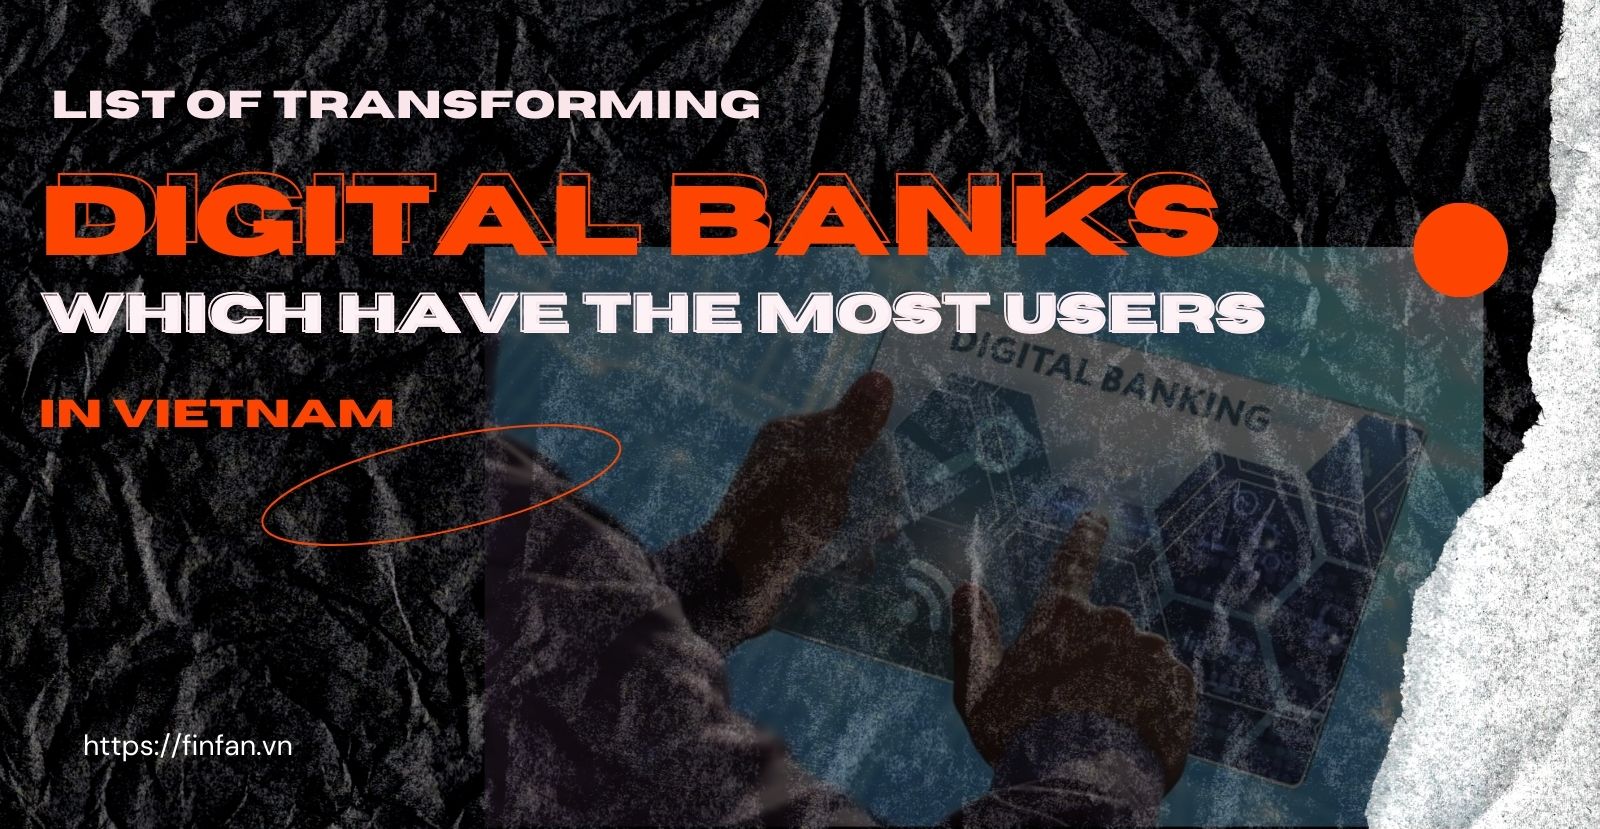 List of transforming digital banks which have the most users in Vietnam